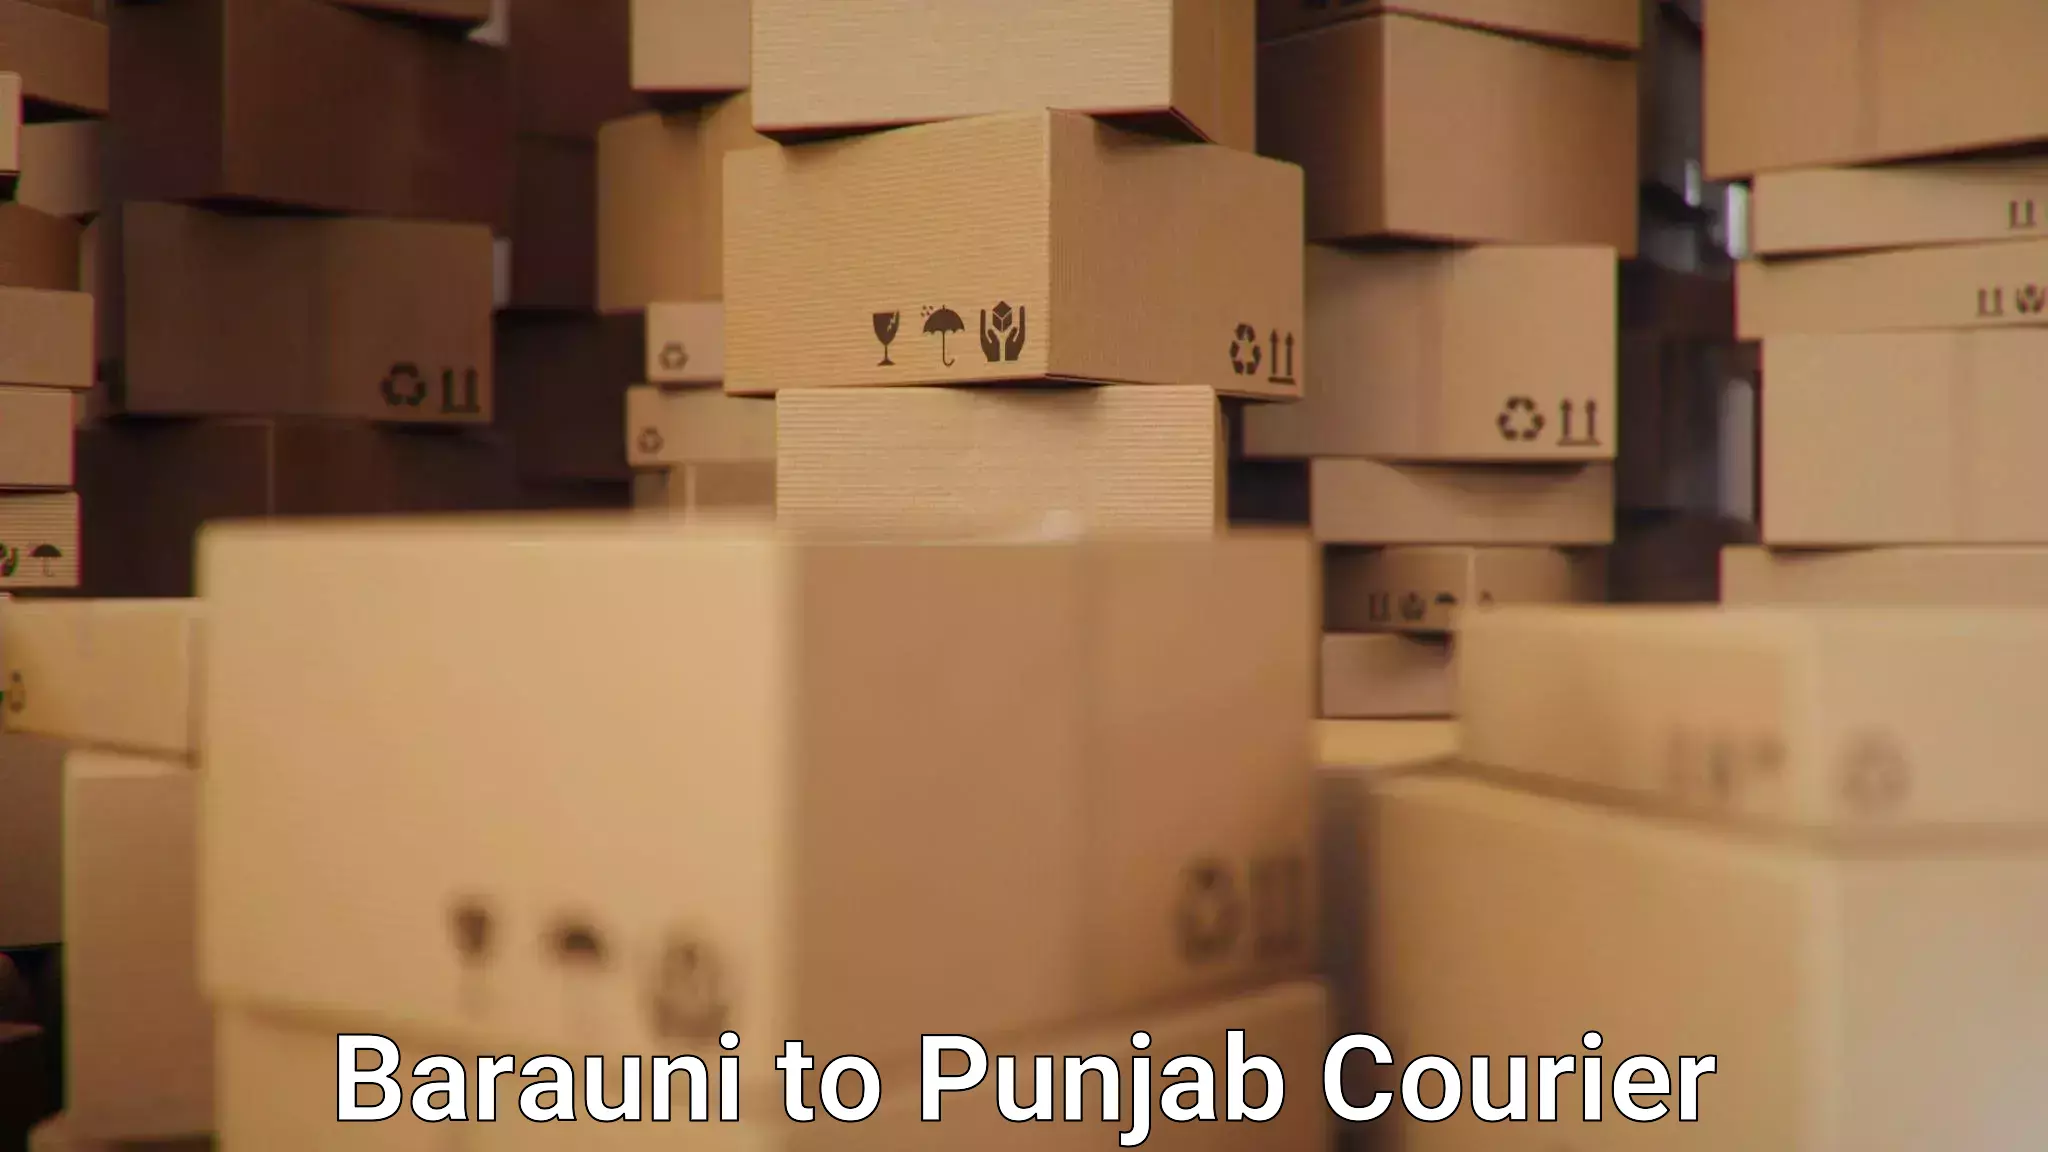 Global courier networks Barauni to Punjab